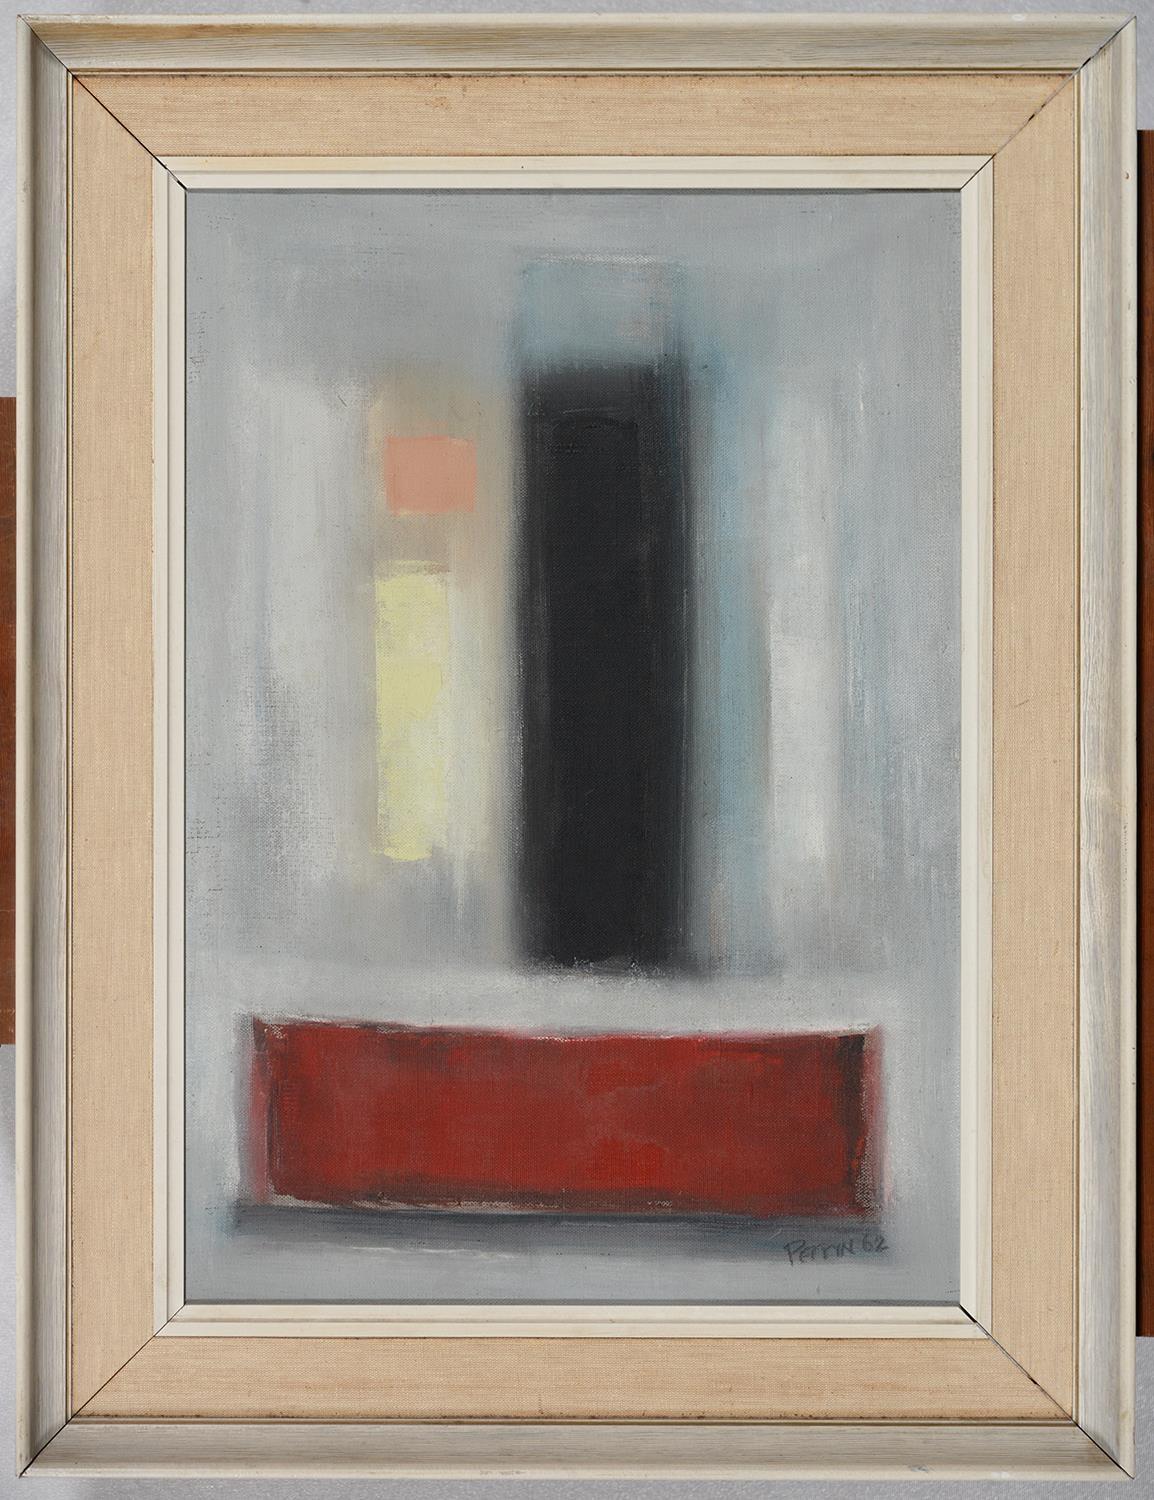 MODERN BRITISH SCHOOL, 1962 - UNTITLED (ABSTRACT), TWO, BOTH SIGNED (PERRIN) AND DATED '62, OIL ON - Image 5 of 6